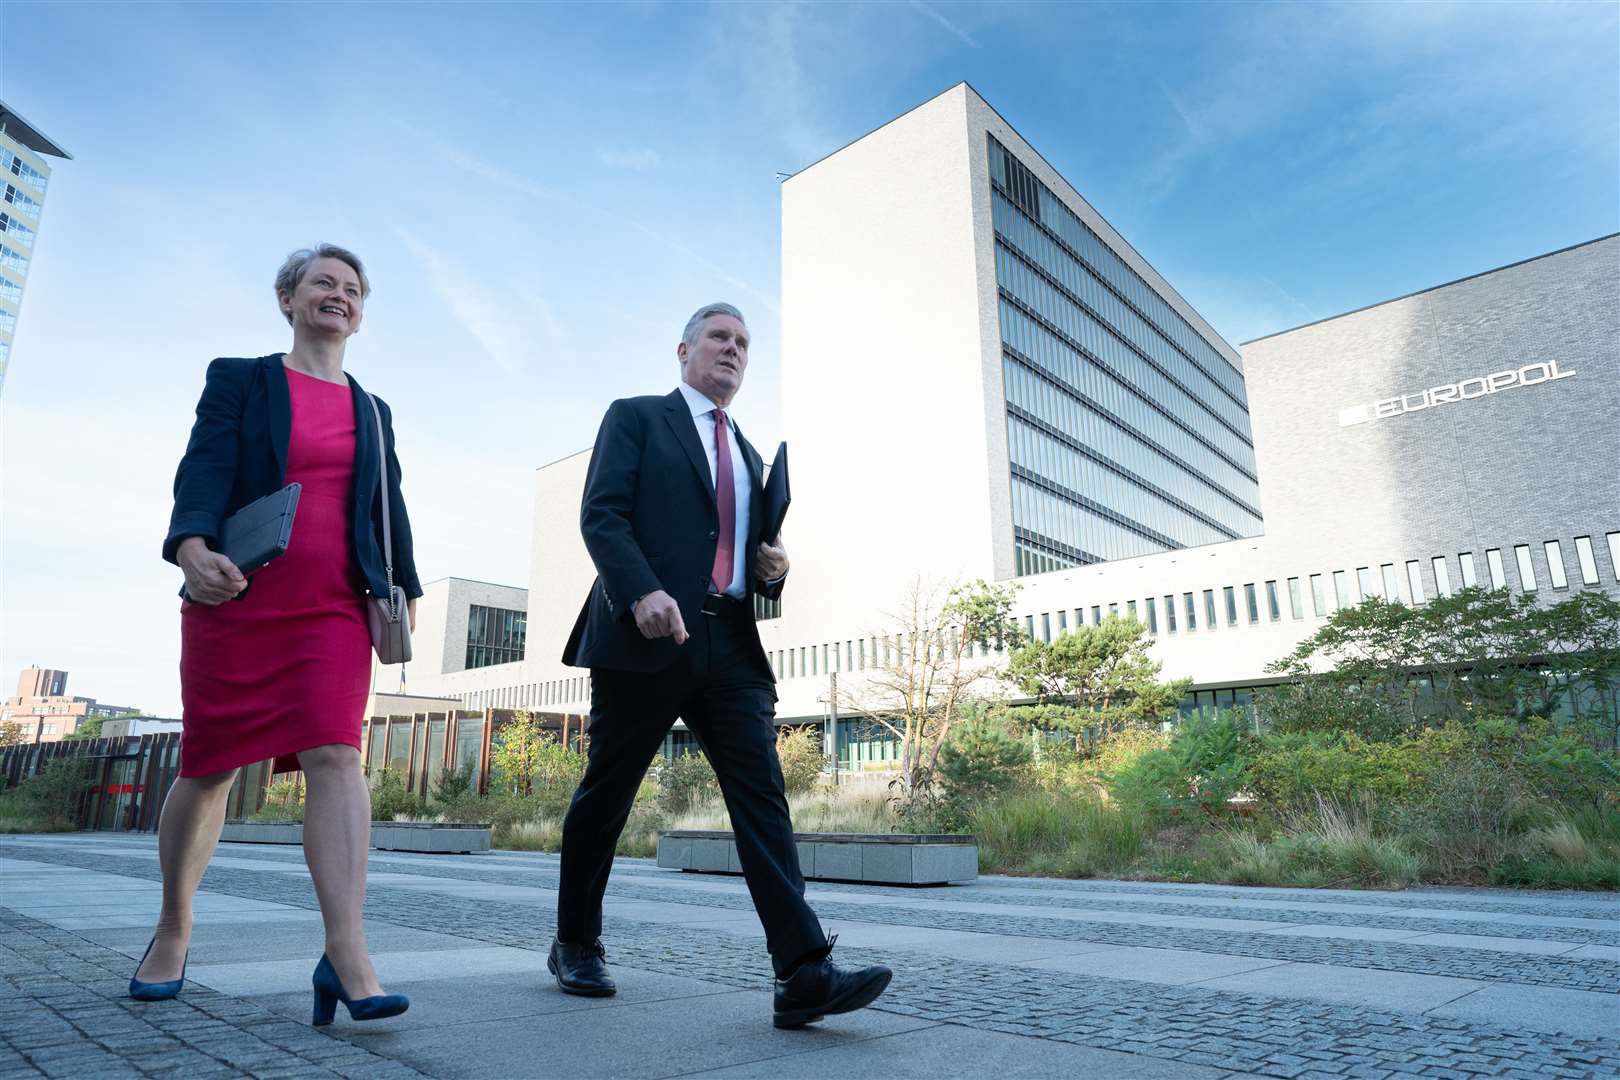 Labour leader Sir Keir Starmer and shadow home secretary Yvette Cooper at Europol in The Hague, Netherlands (Stefan Rousseau/PA)